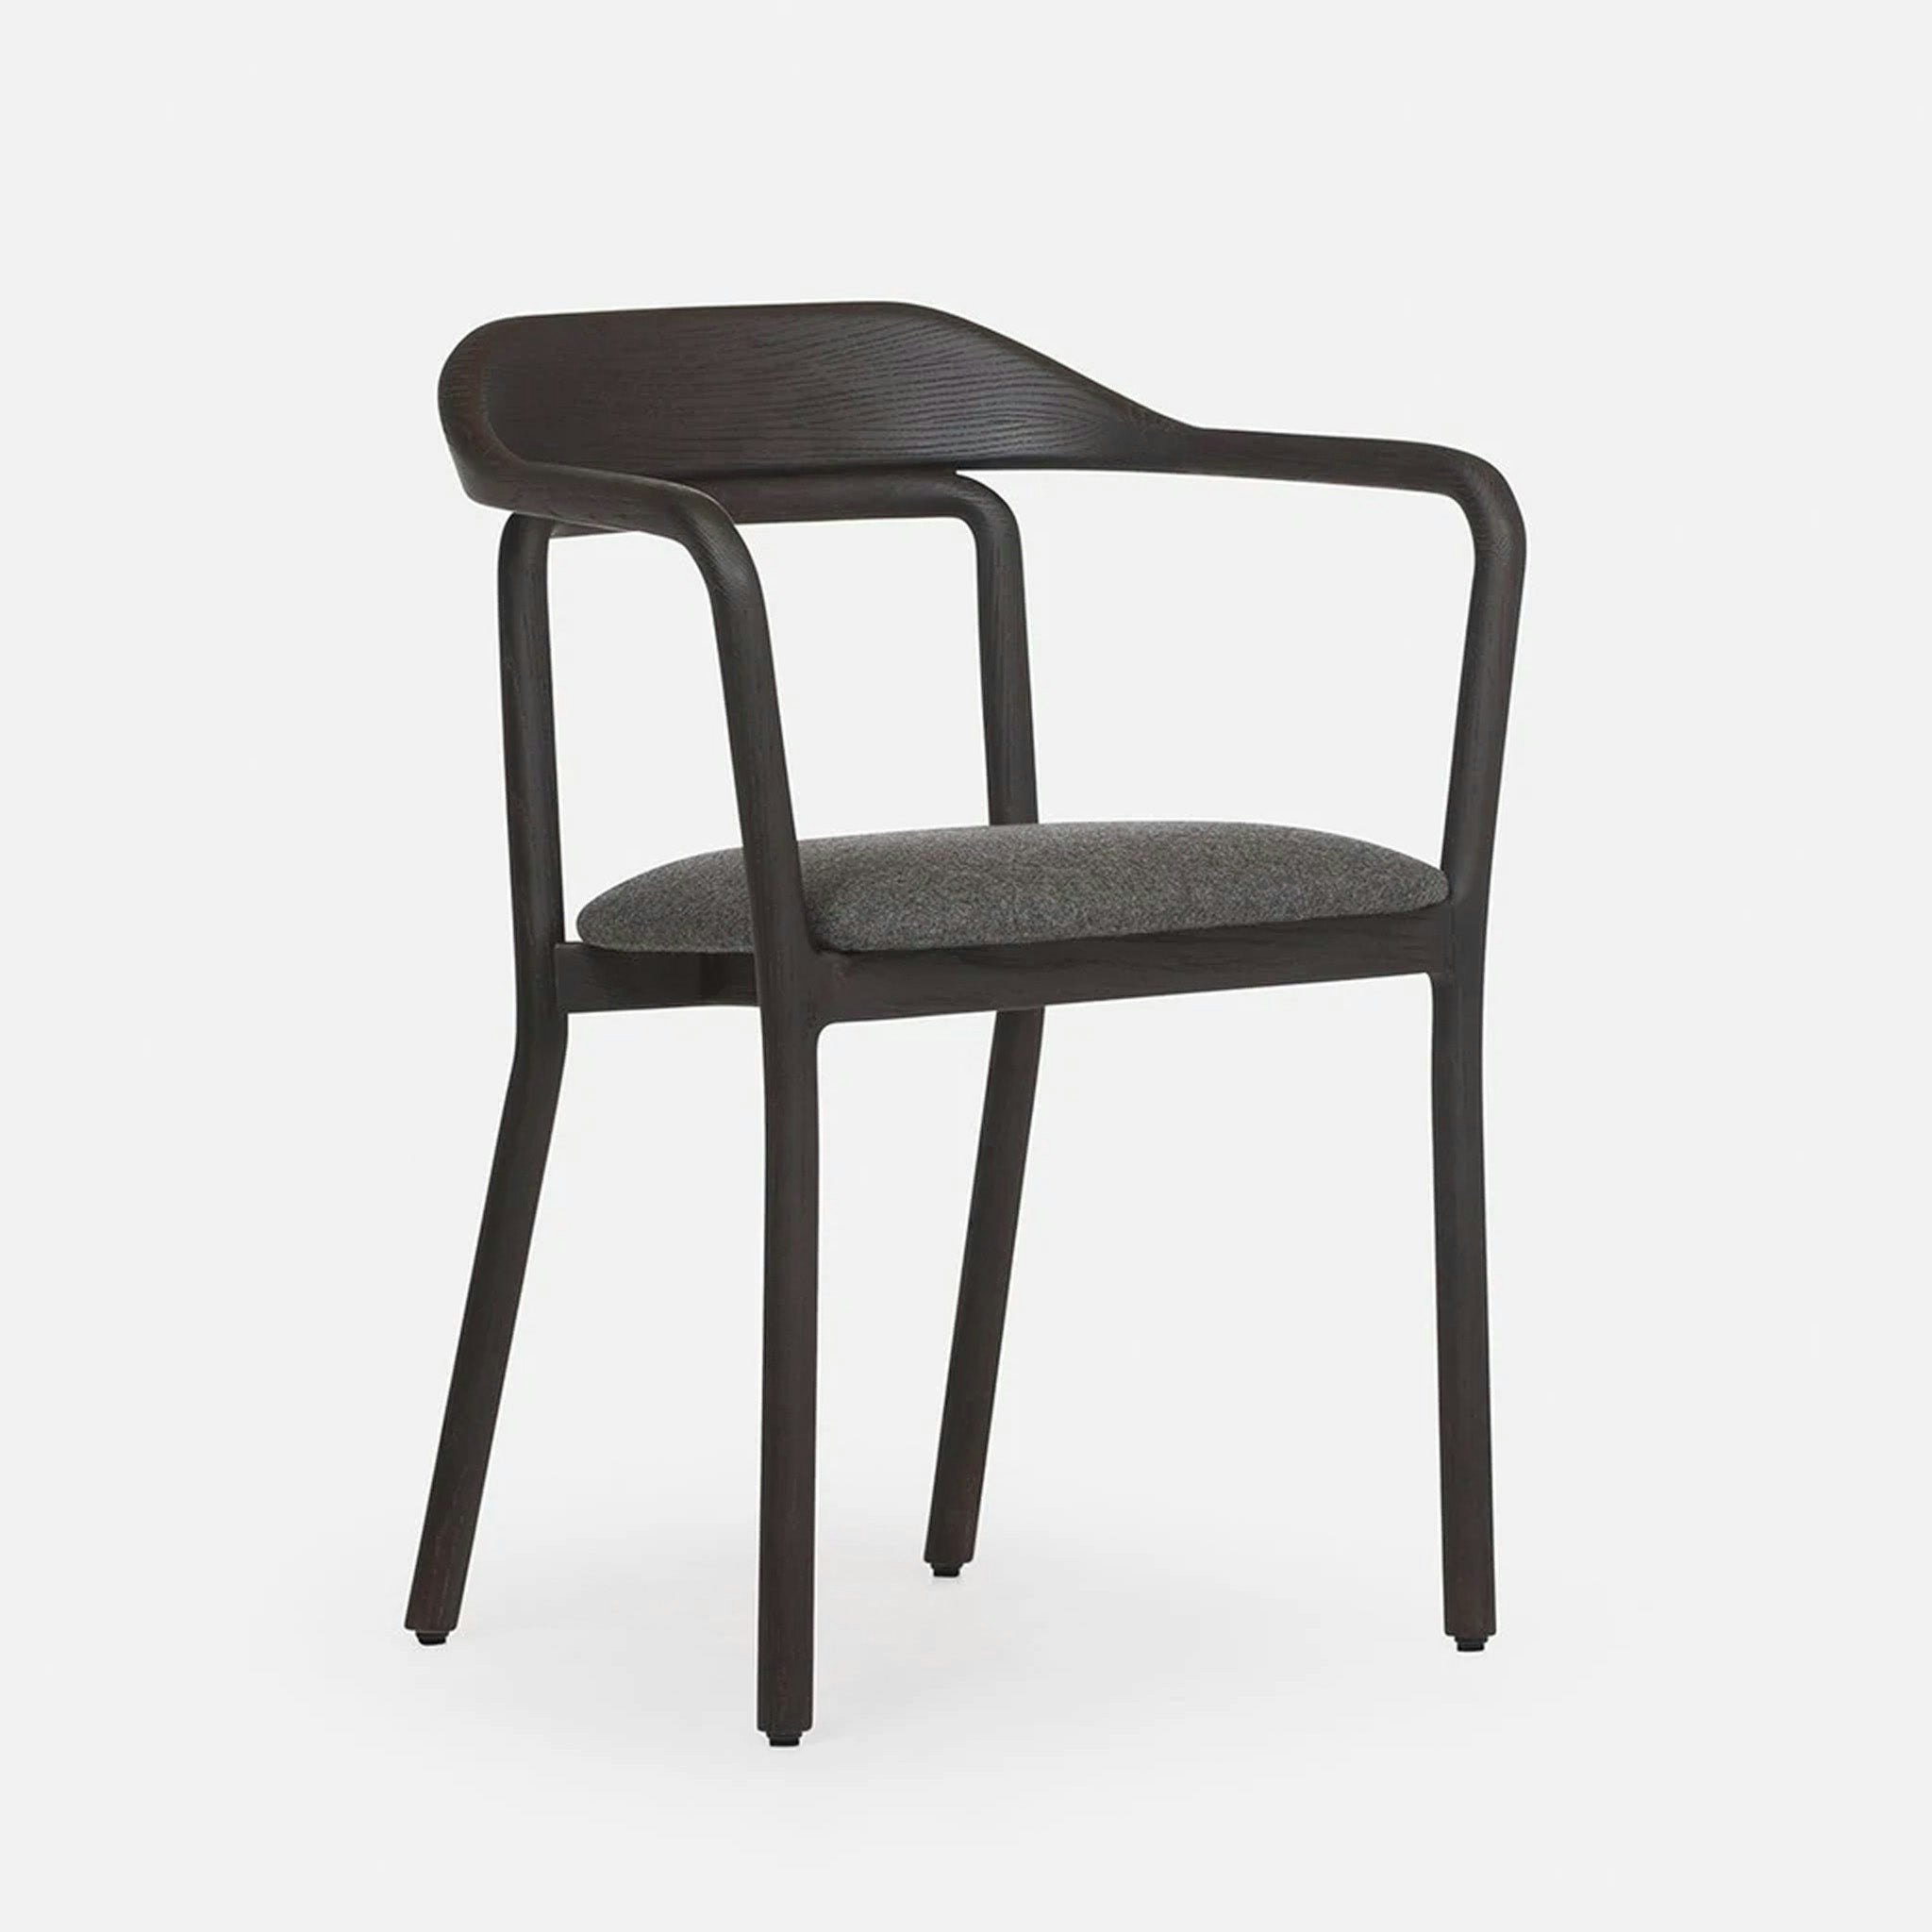 Duet Chair Upholstered Seat by Lyndon Neri and Rossana Hu